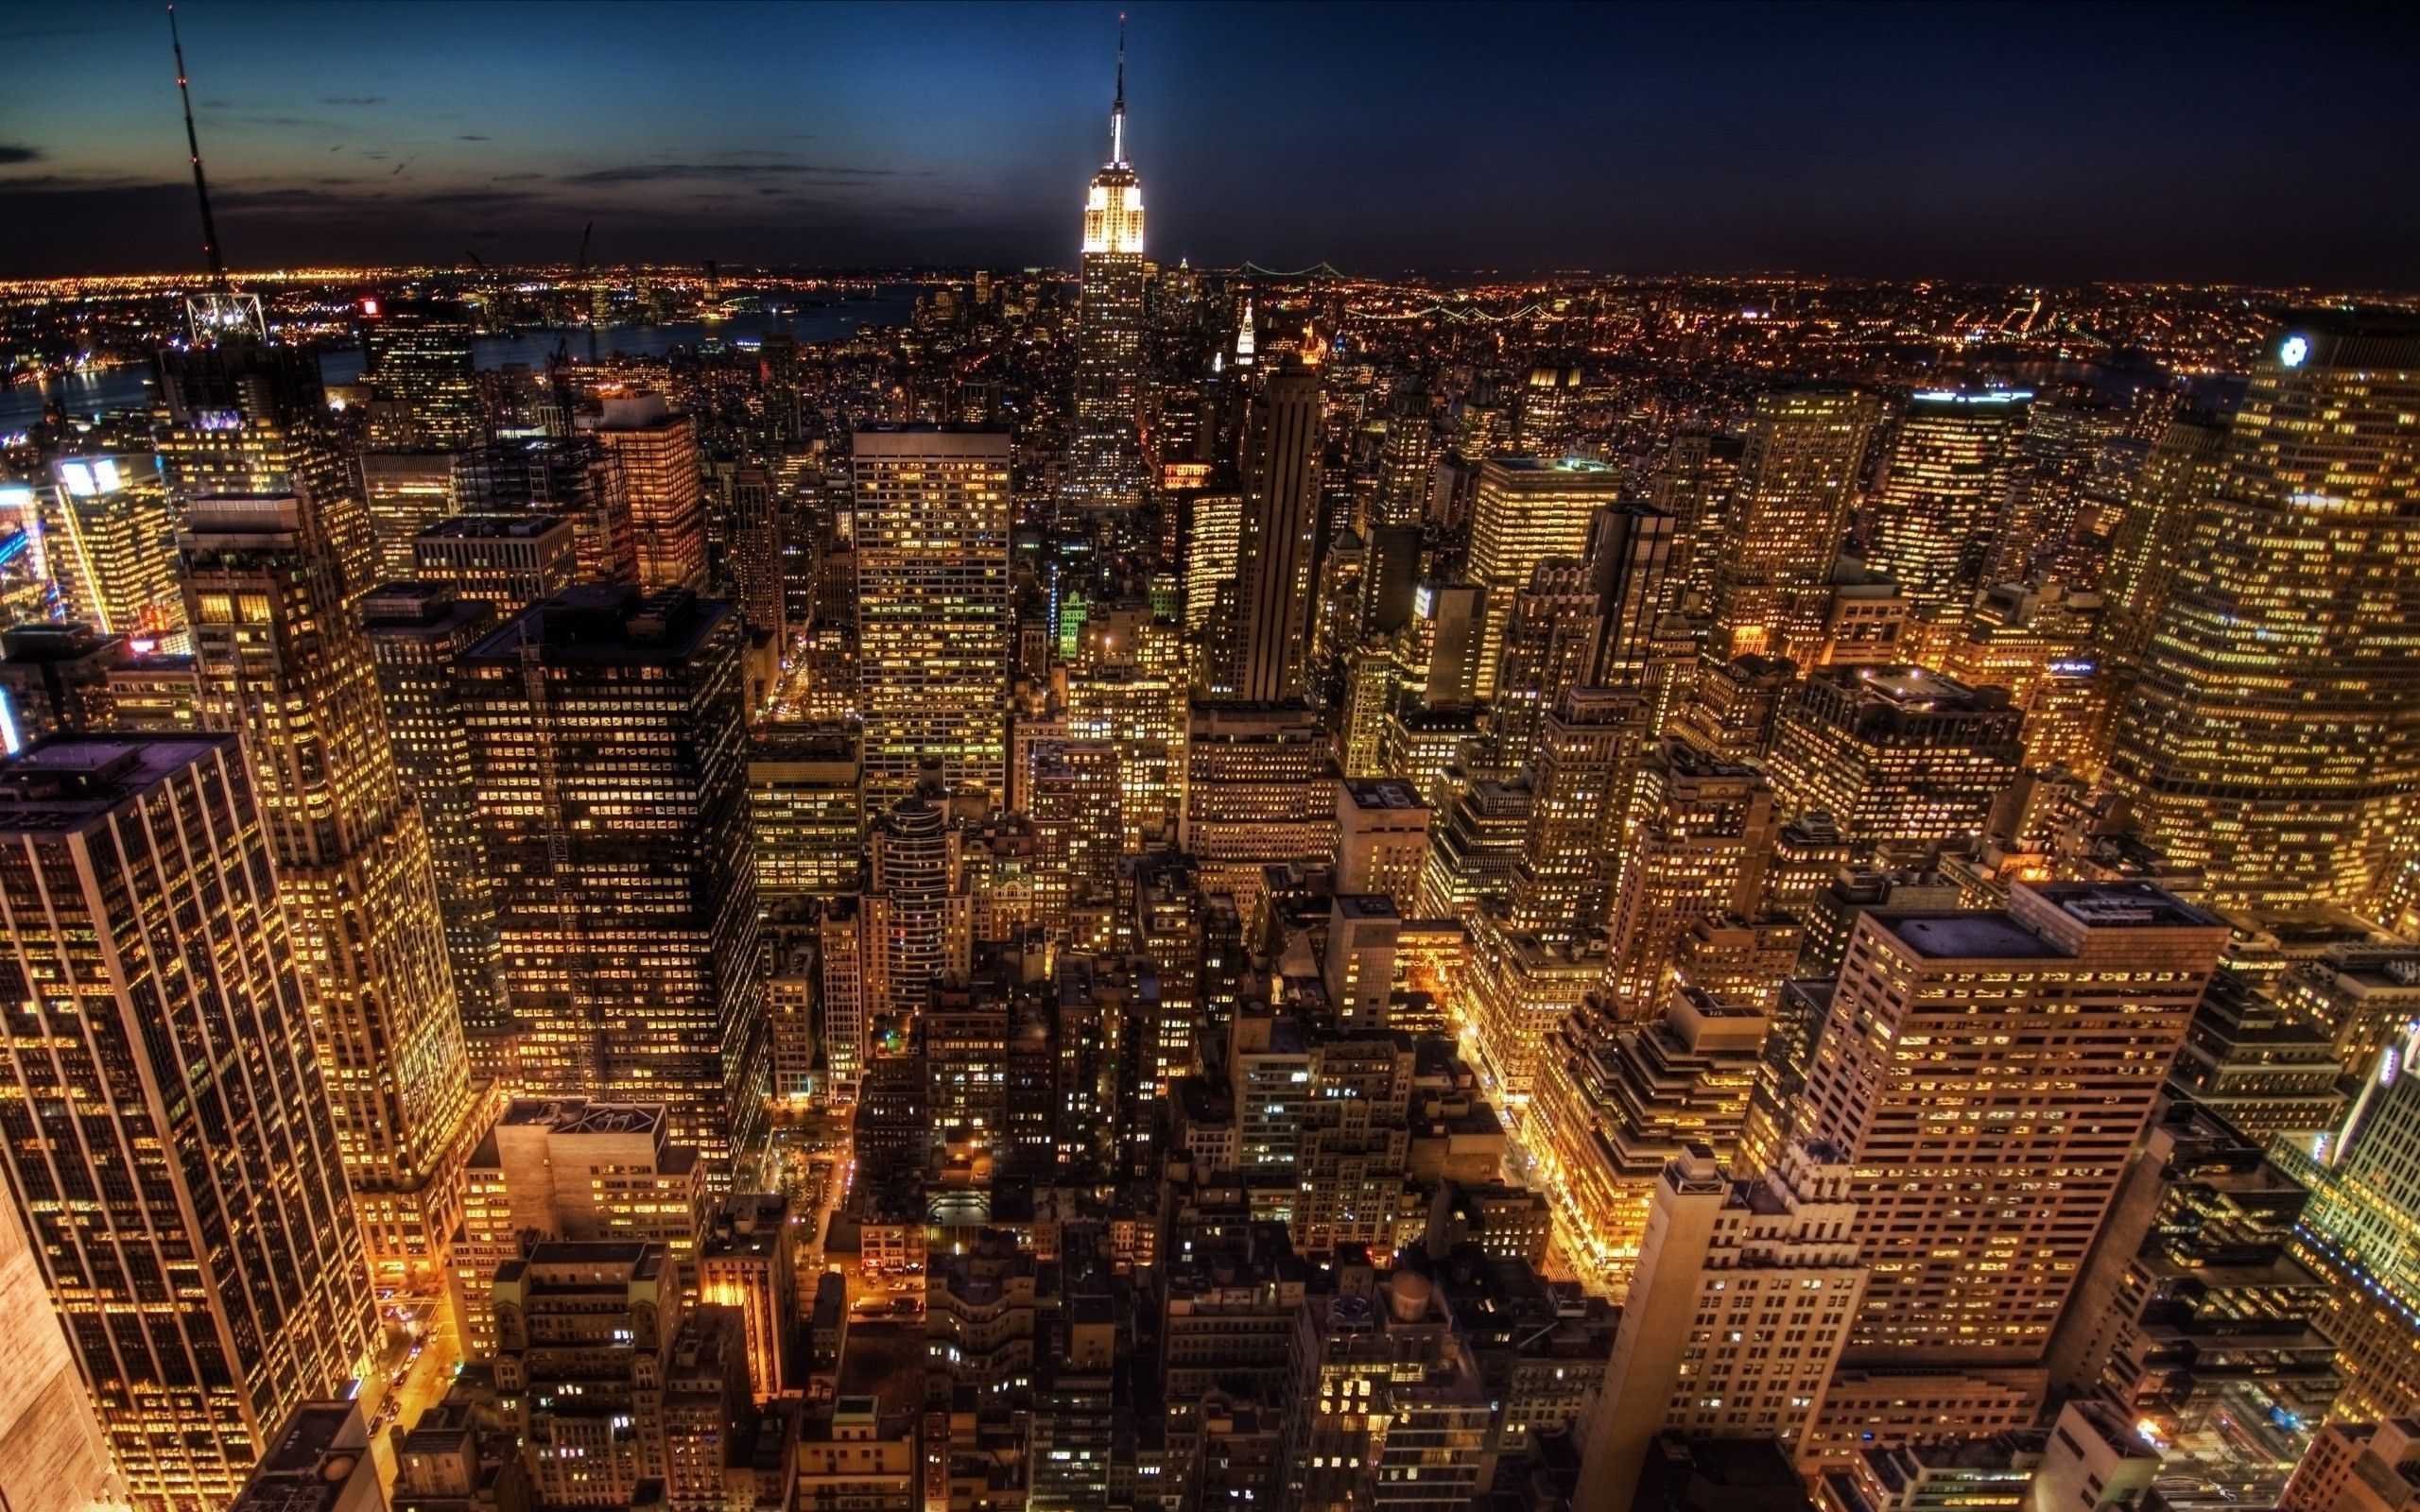 A city skyline at night with buildings and lights - New York, 2560x1600